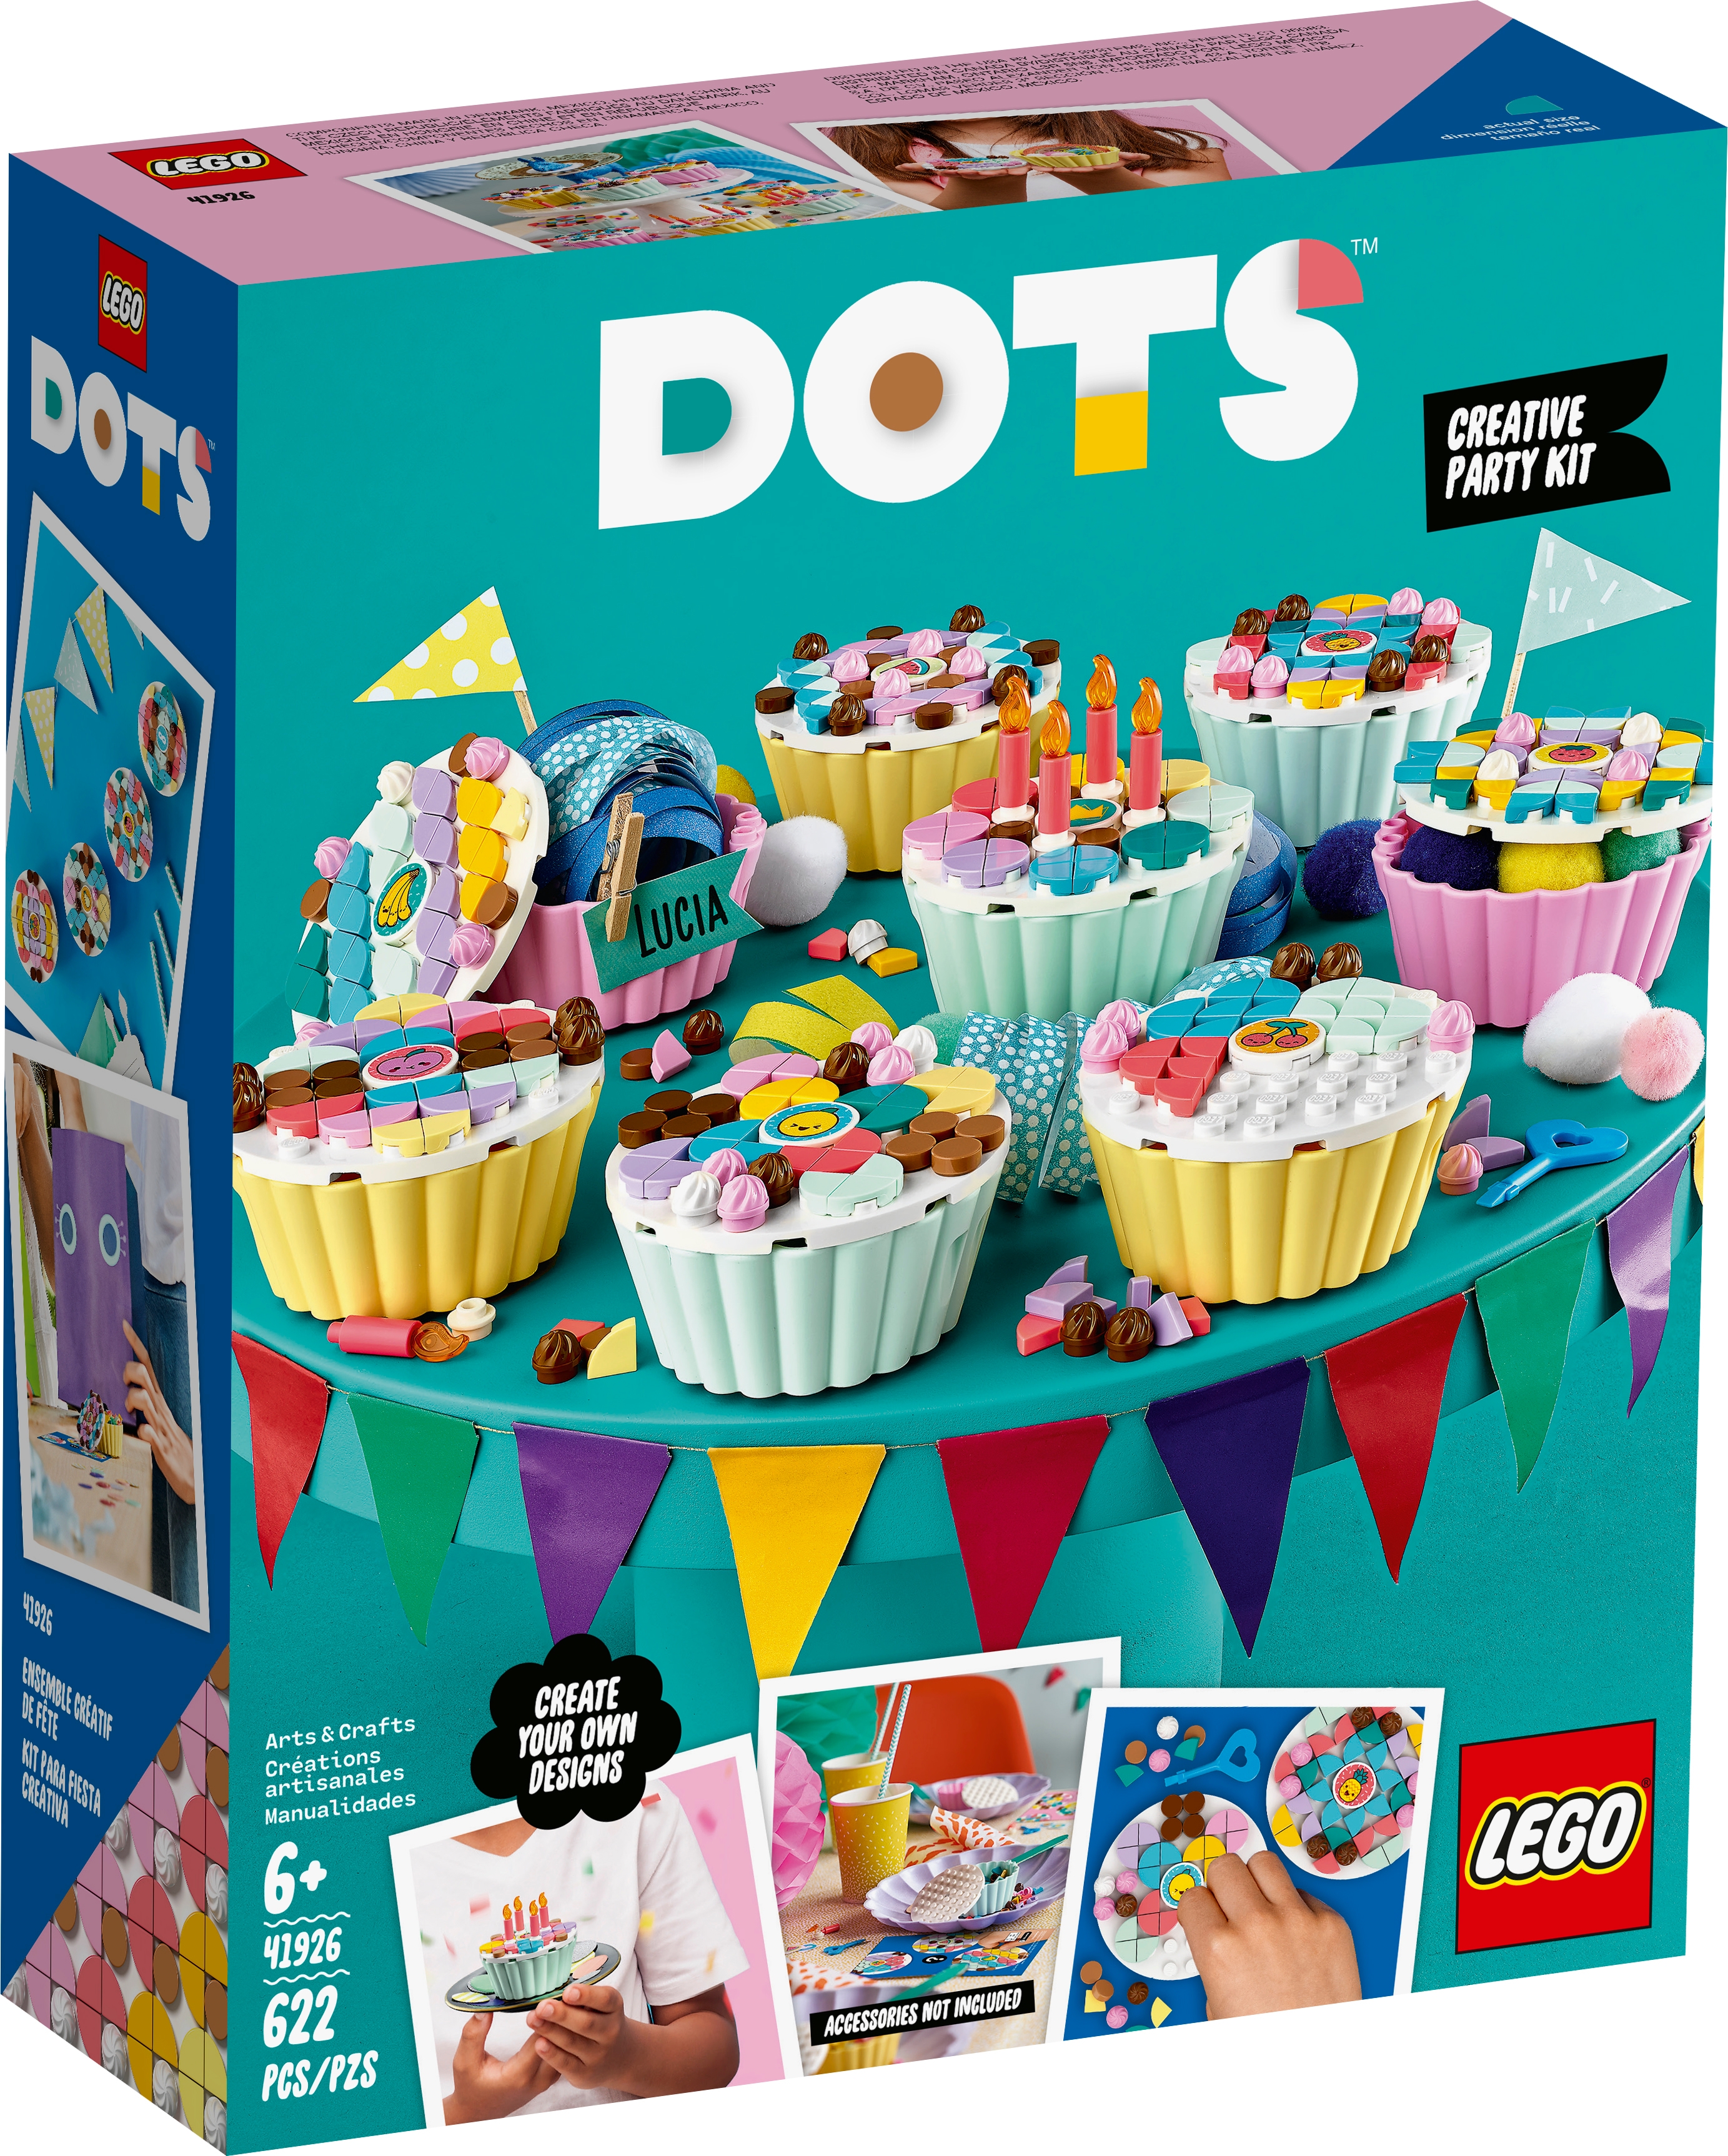 Details about   LEGO DOTS 41926 Creative Party Kit DIY Craft Decorations Kit Kids Gift Set 